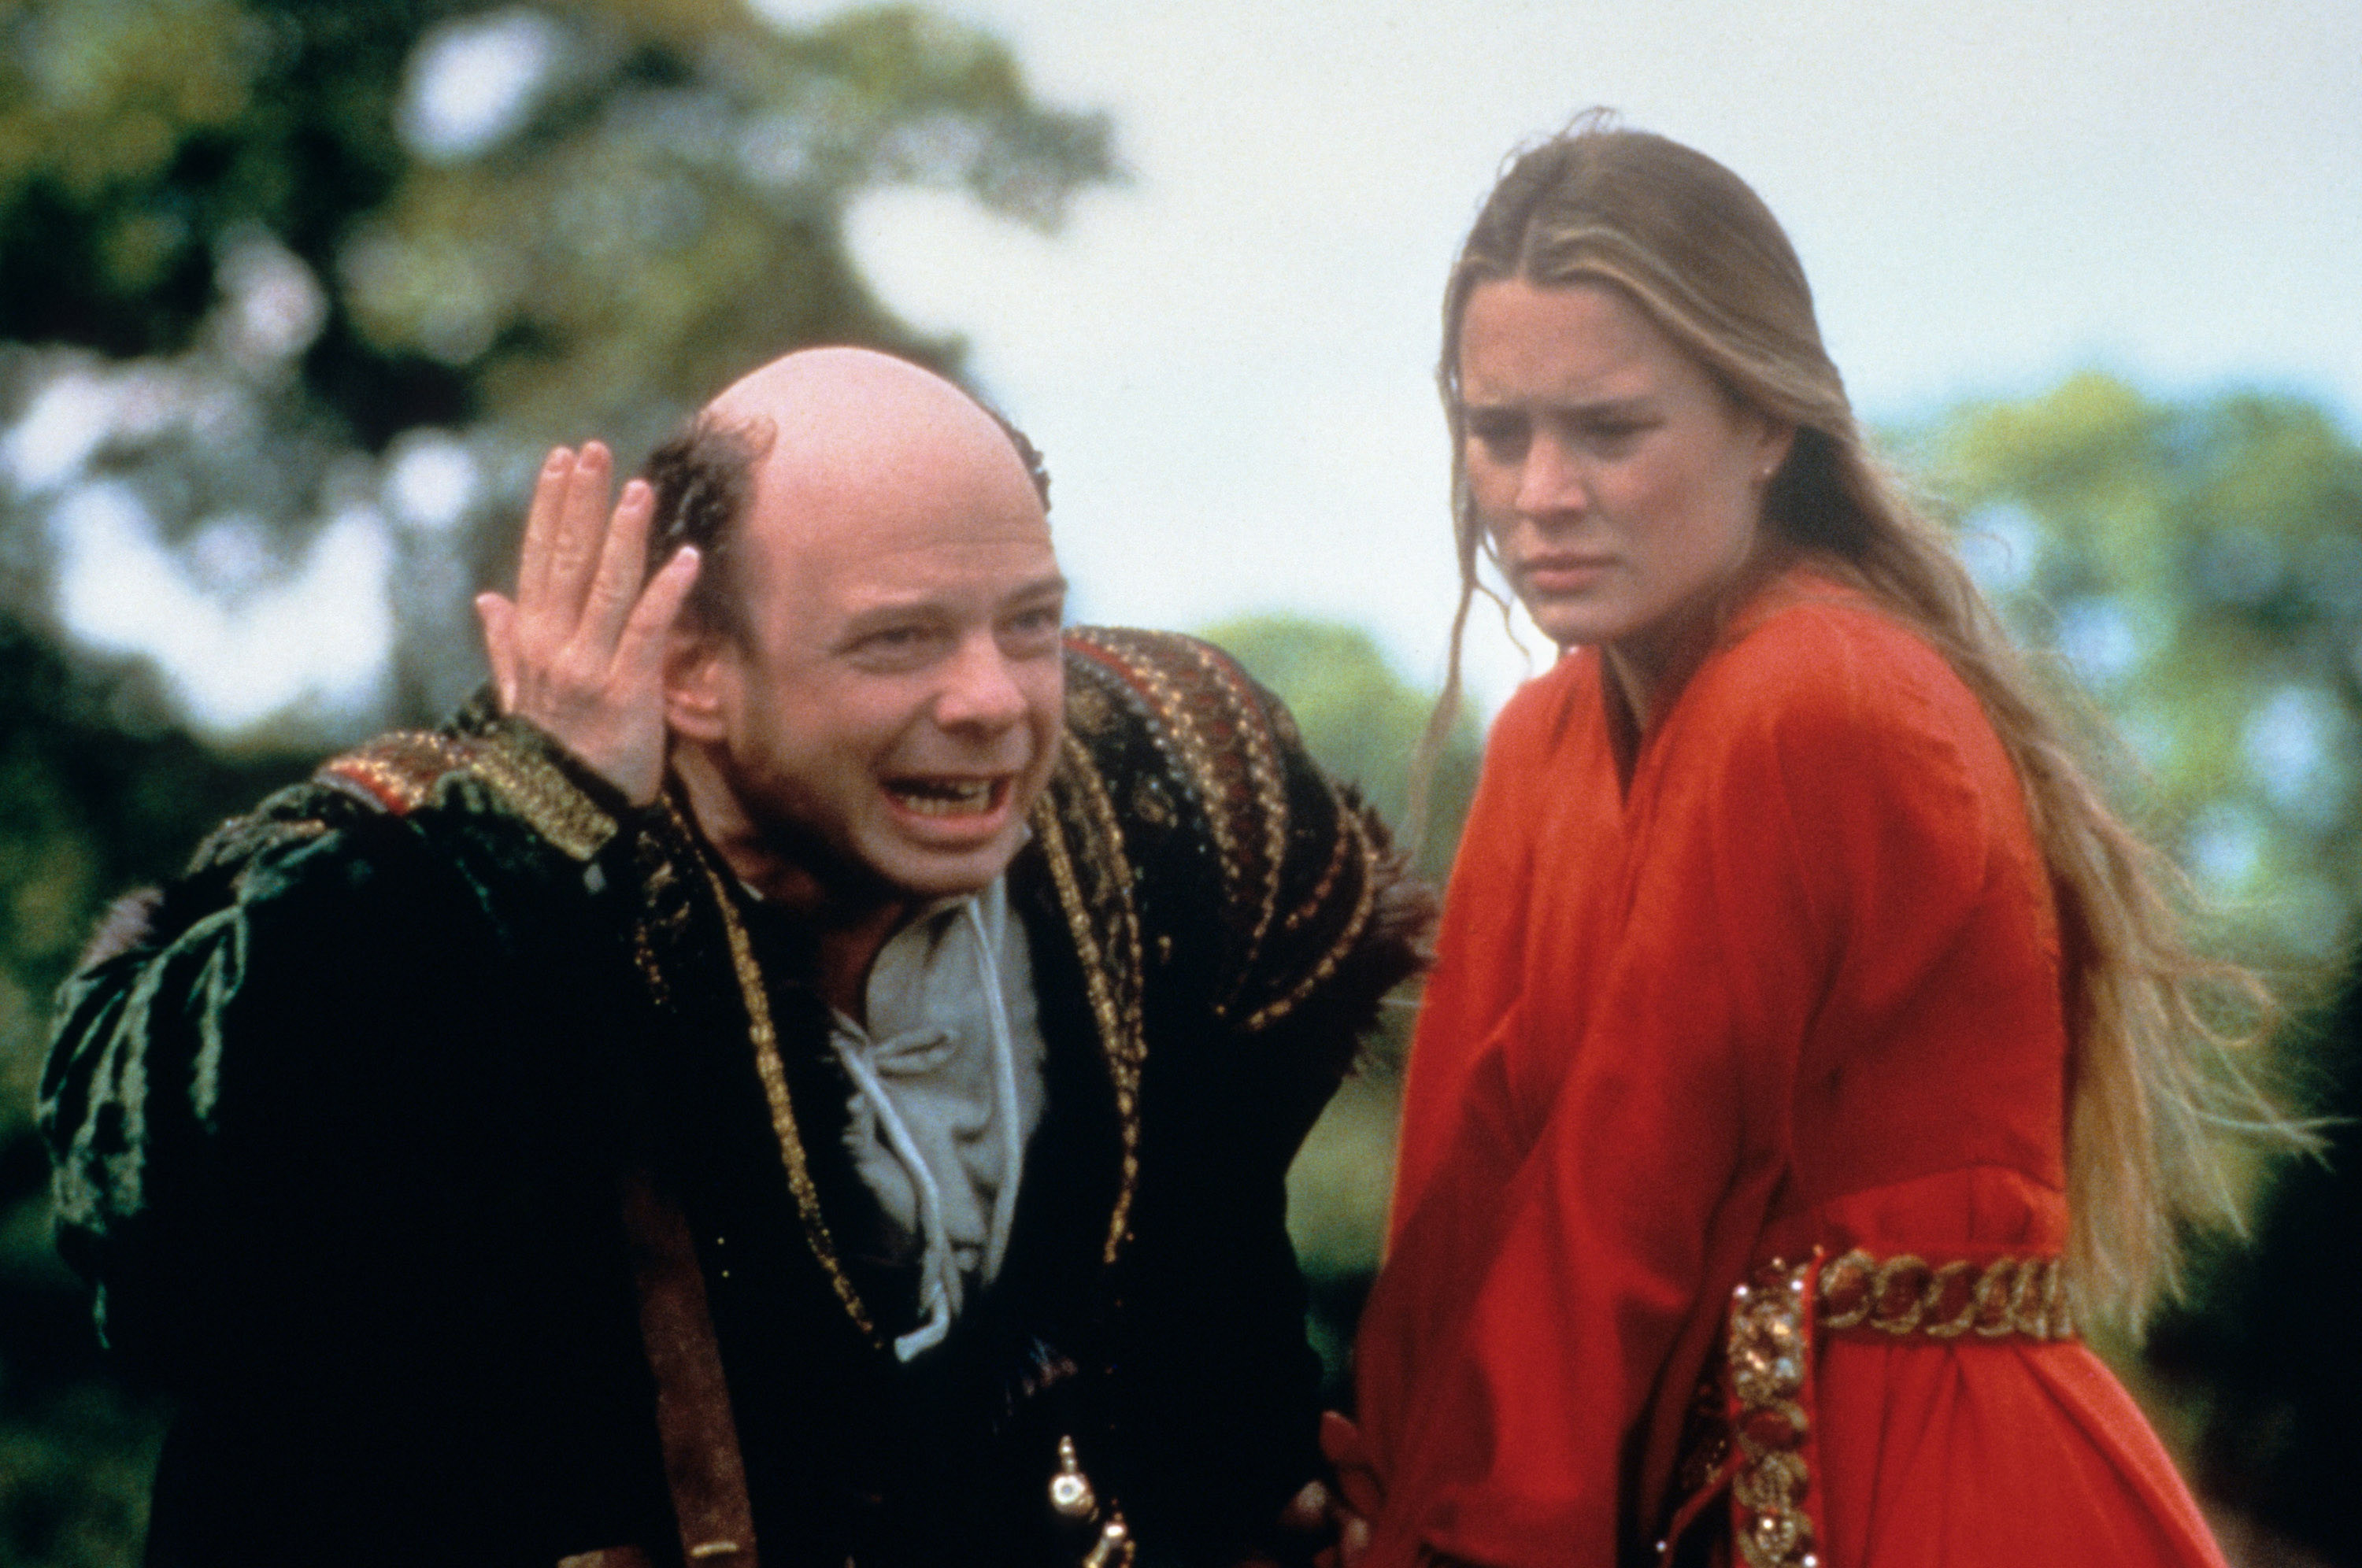 Wallace Shawn and Robin Wright stand together in the woods